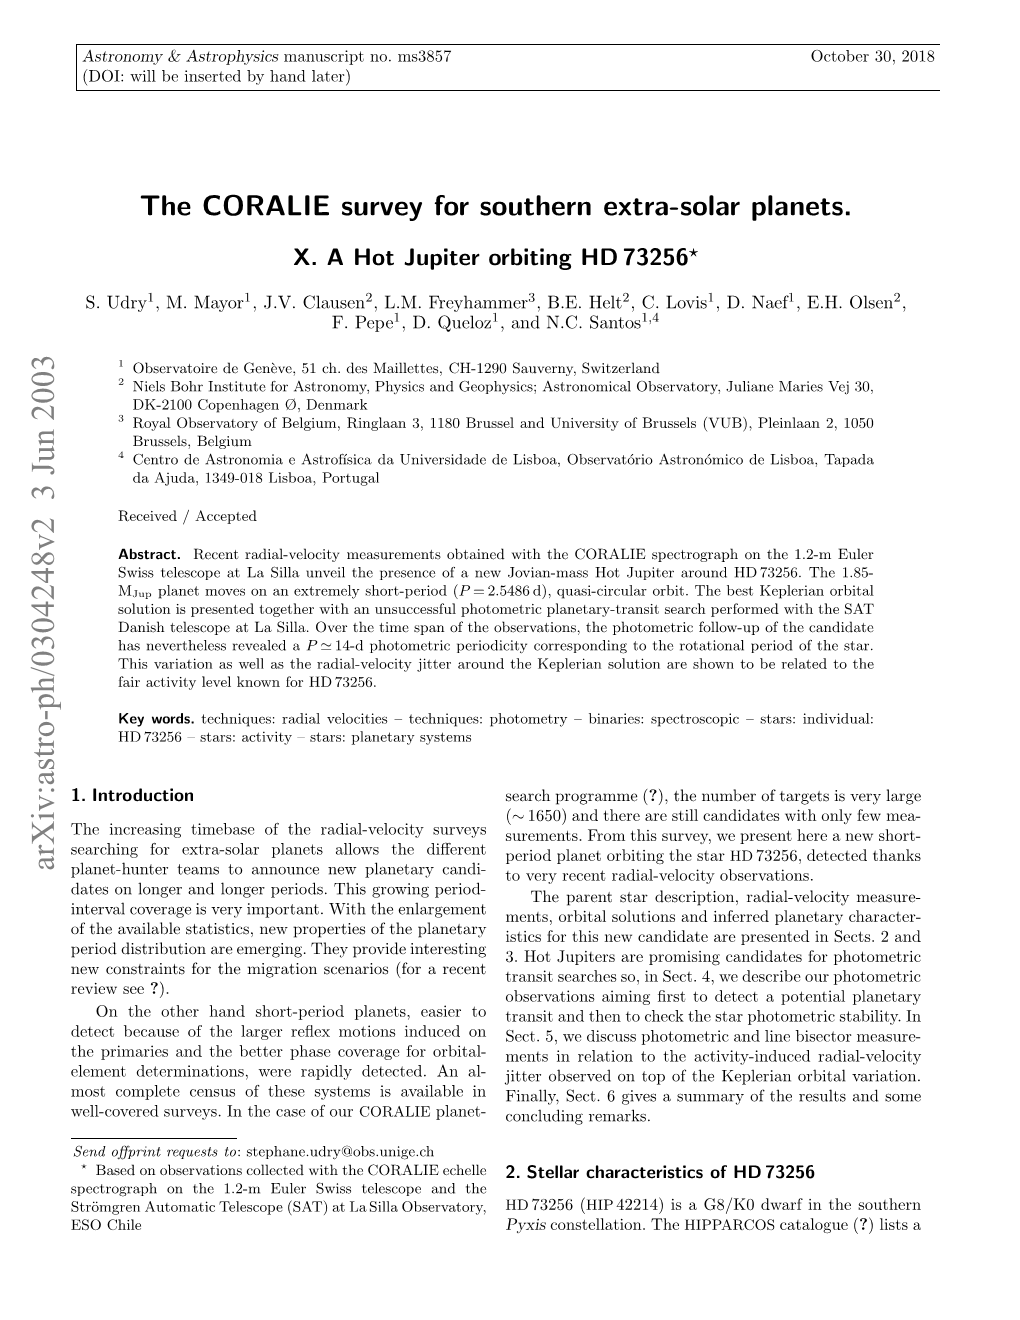 The CORALIE Survey for Southern Extra-Solar Planets. X. a Hot Jupiter